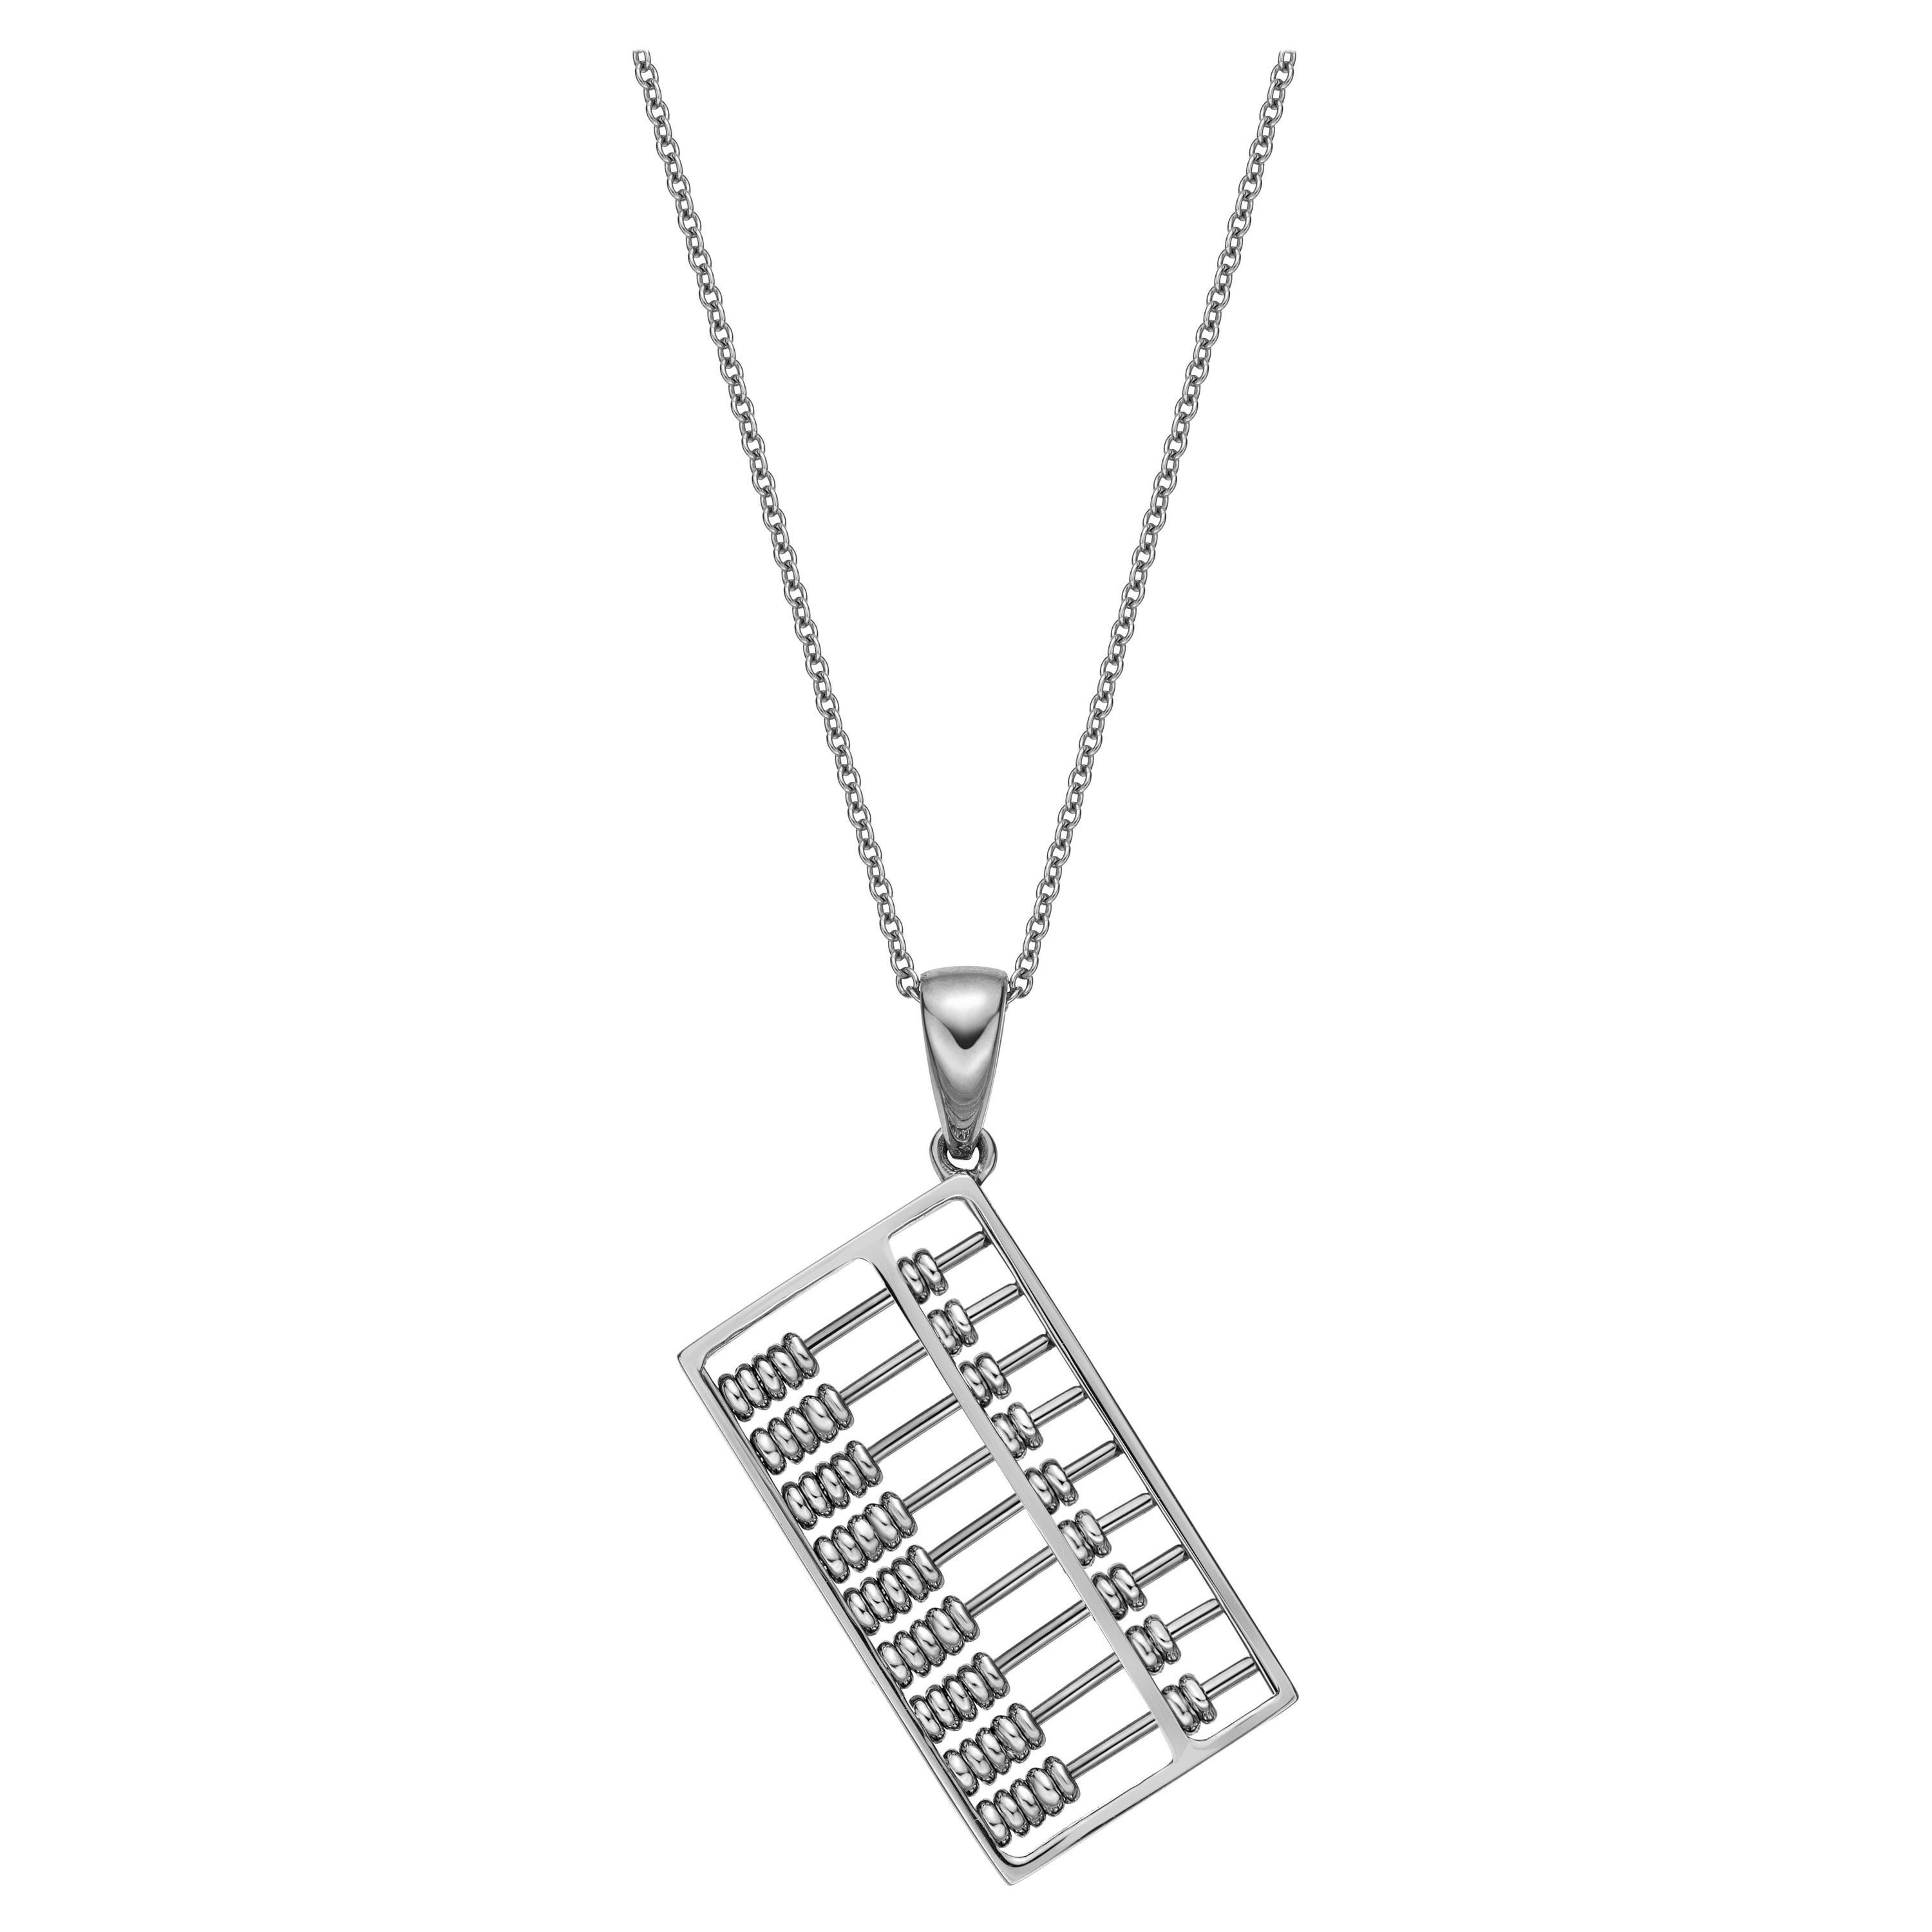 18 Karat White Gold Pendant with Necklace